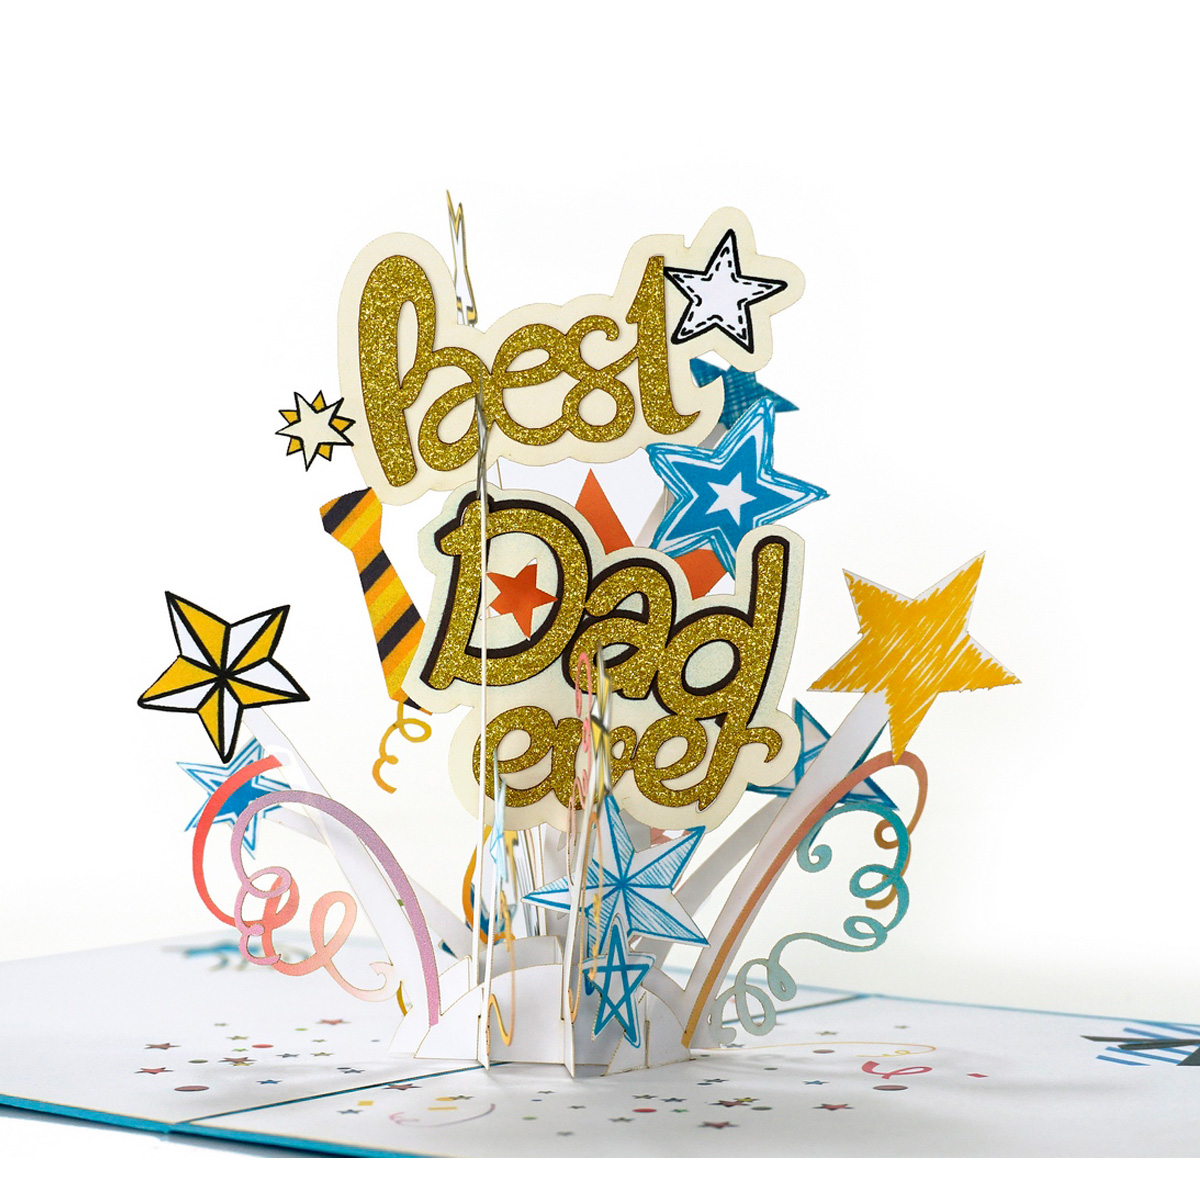 Customized-3D-pop-up-greeting-cards-for-Father’s-Day-Wholesale-01